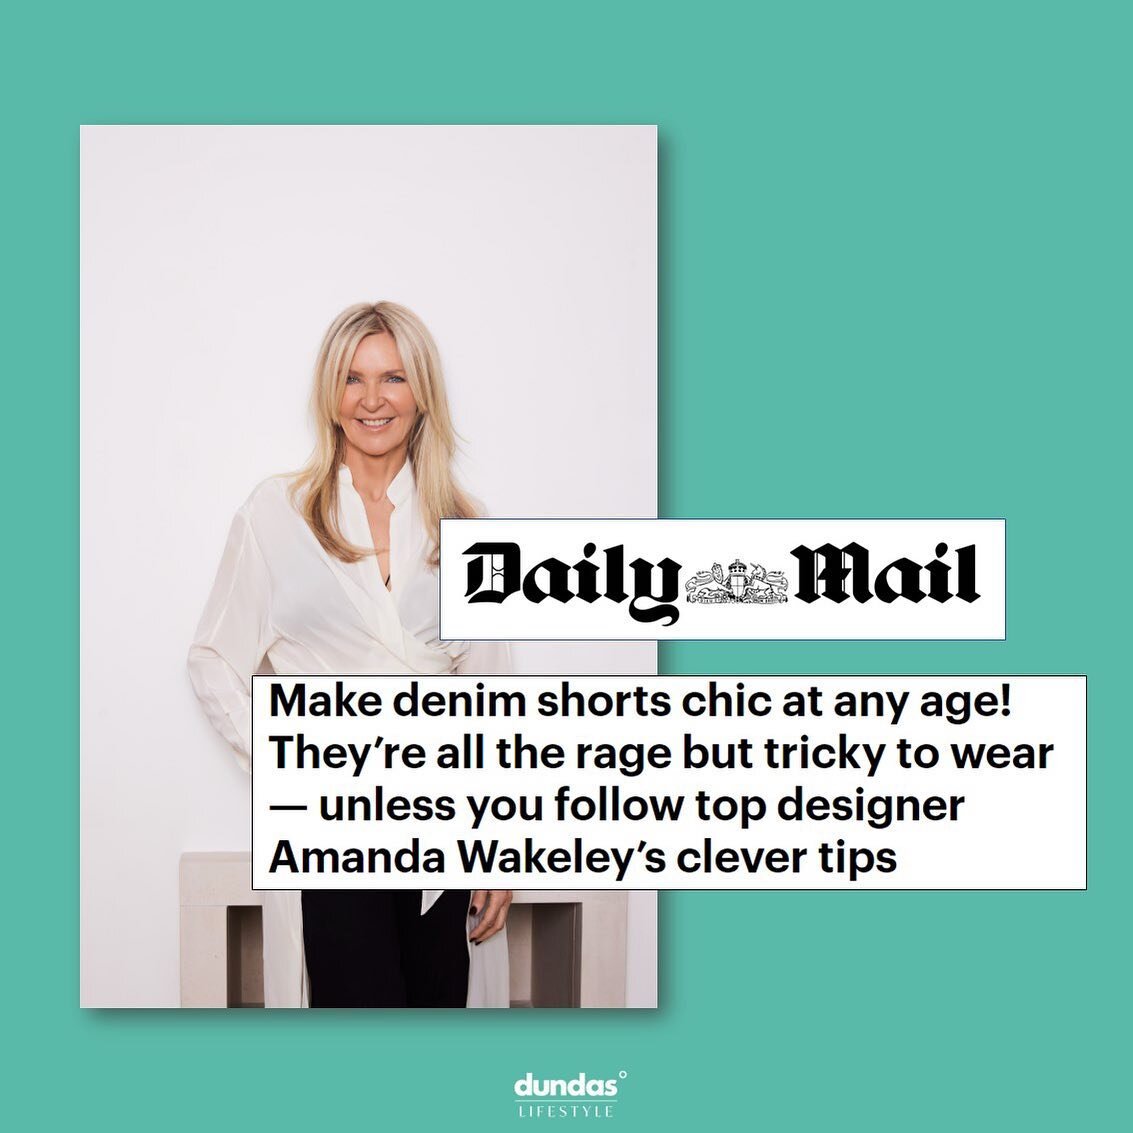 &ldquo;For me, there is something incredibly freeing about wearing denim cut-offs&hellip;&rdquo; - in today&rsquo;s Daily Mail, @amandawakeley tells you how to make denim shorts chic at any age👖